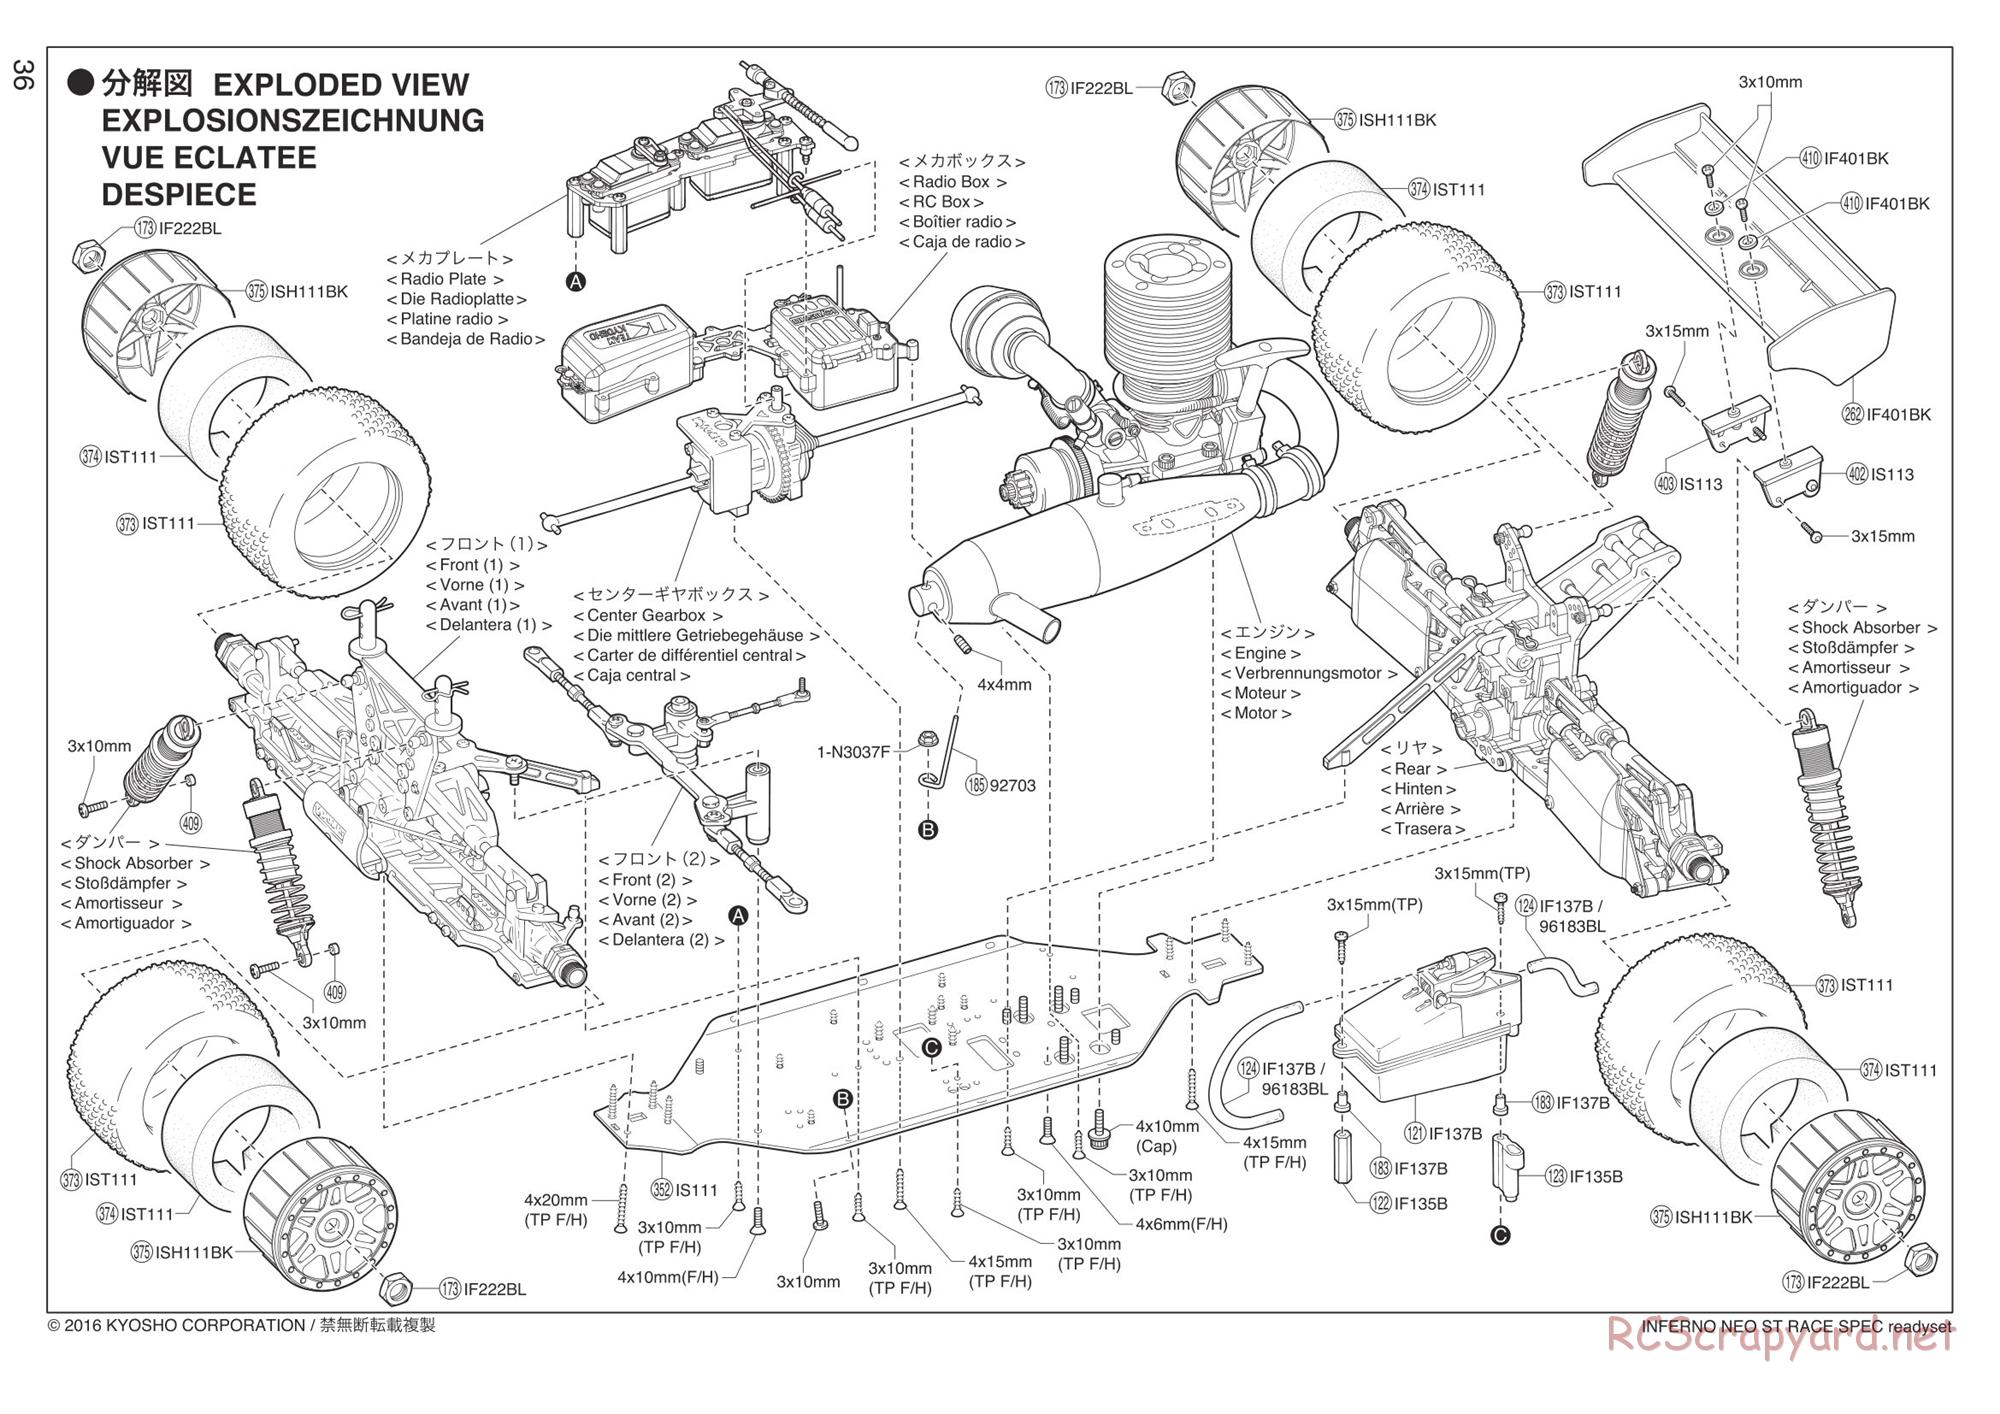 Kyosho - Inferno NEO ST Race Spec - Exploded Views - Page 1